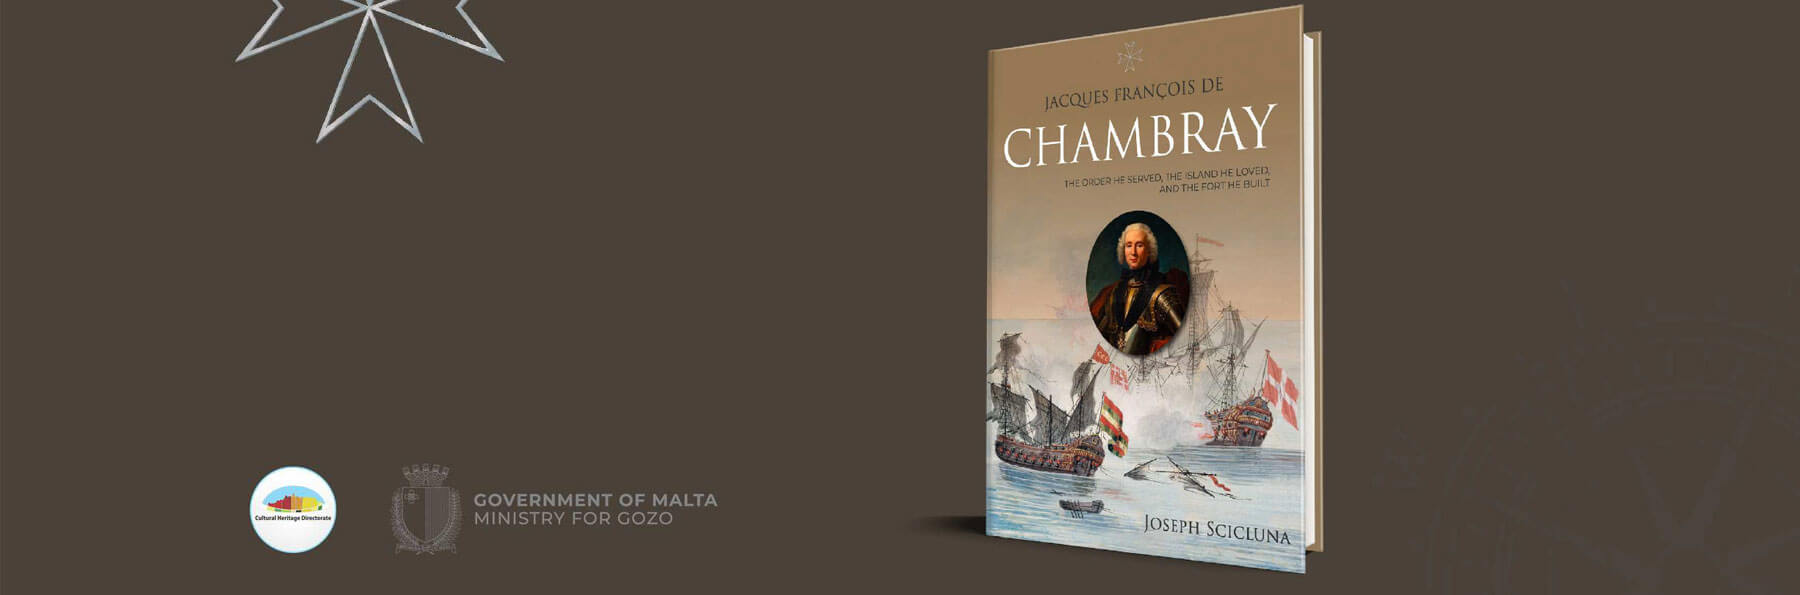 Jacques Francois de Chambray – The Order he served, The Island he loved, The Fort he built